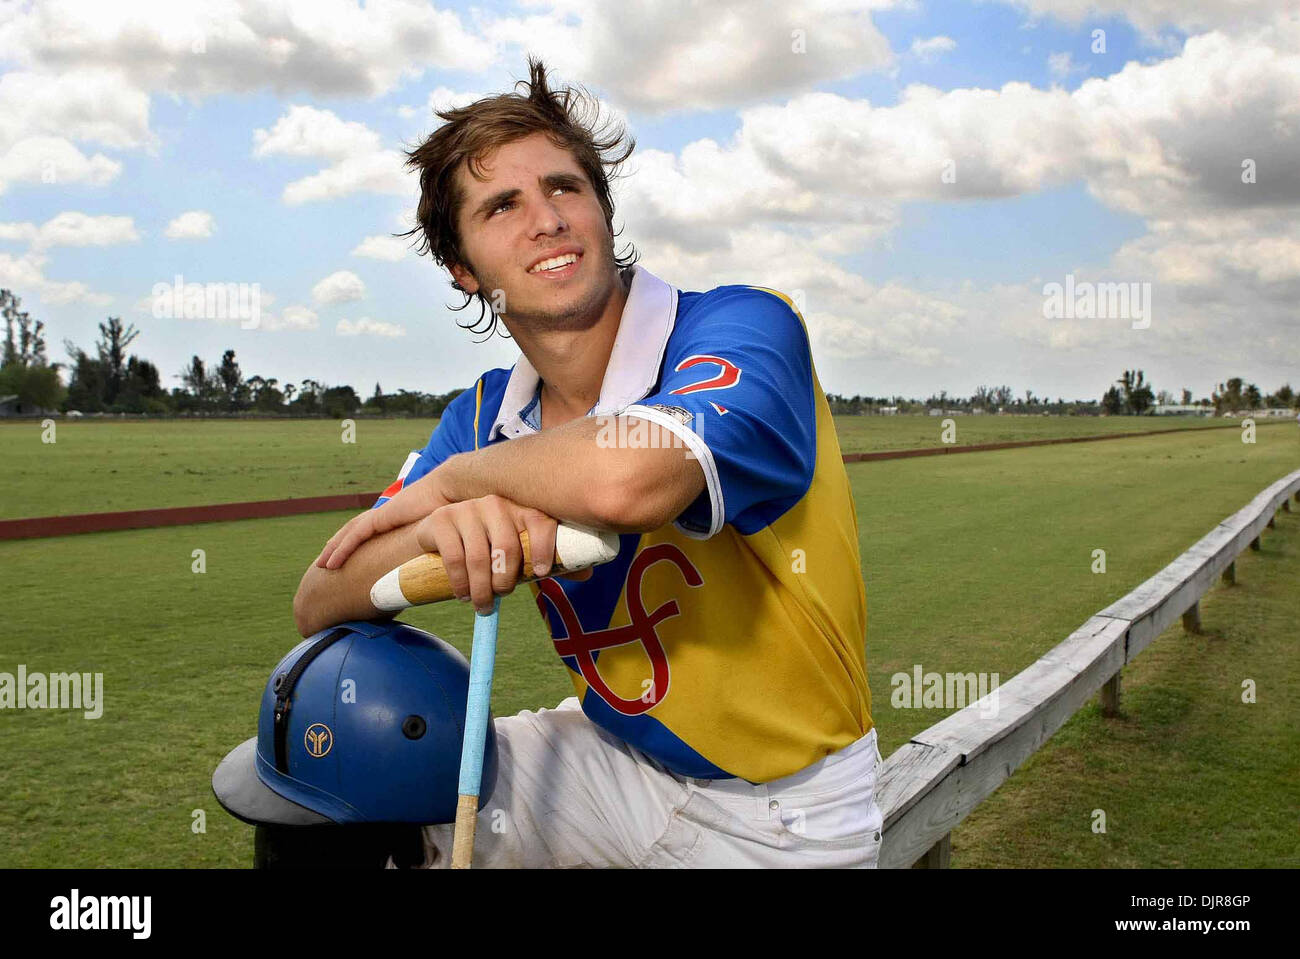 Apr 08, 2010 - Immokalee, Florida, U.S. - Lake Worth: SANTIAGO TORRES, 16, of Santa Barbara, Ca., a four goal professional polo player with over ten years of experience in the sport, poses for a photograph after a match for Shanghai Polo ThursdayÊ against Tres Vino polo club at Gulfstream in Lake Worth. (Credit Image: © Bill Ingram/Palm Beach Post/ZUMApress.com) Stock Photo